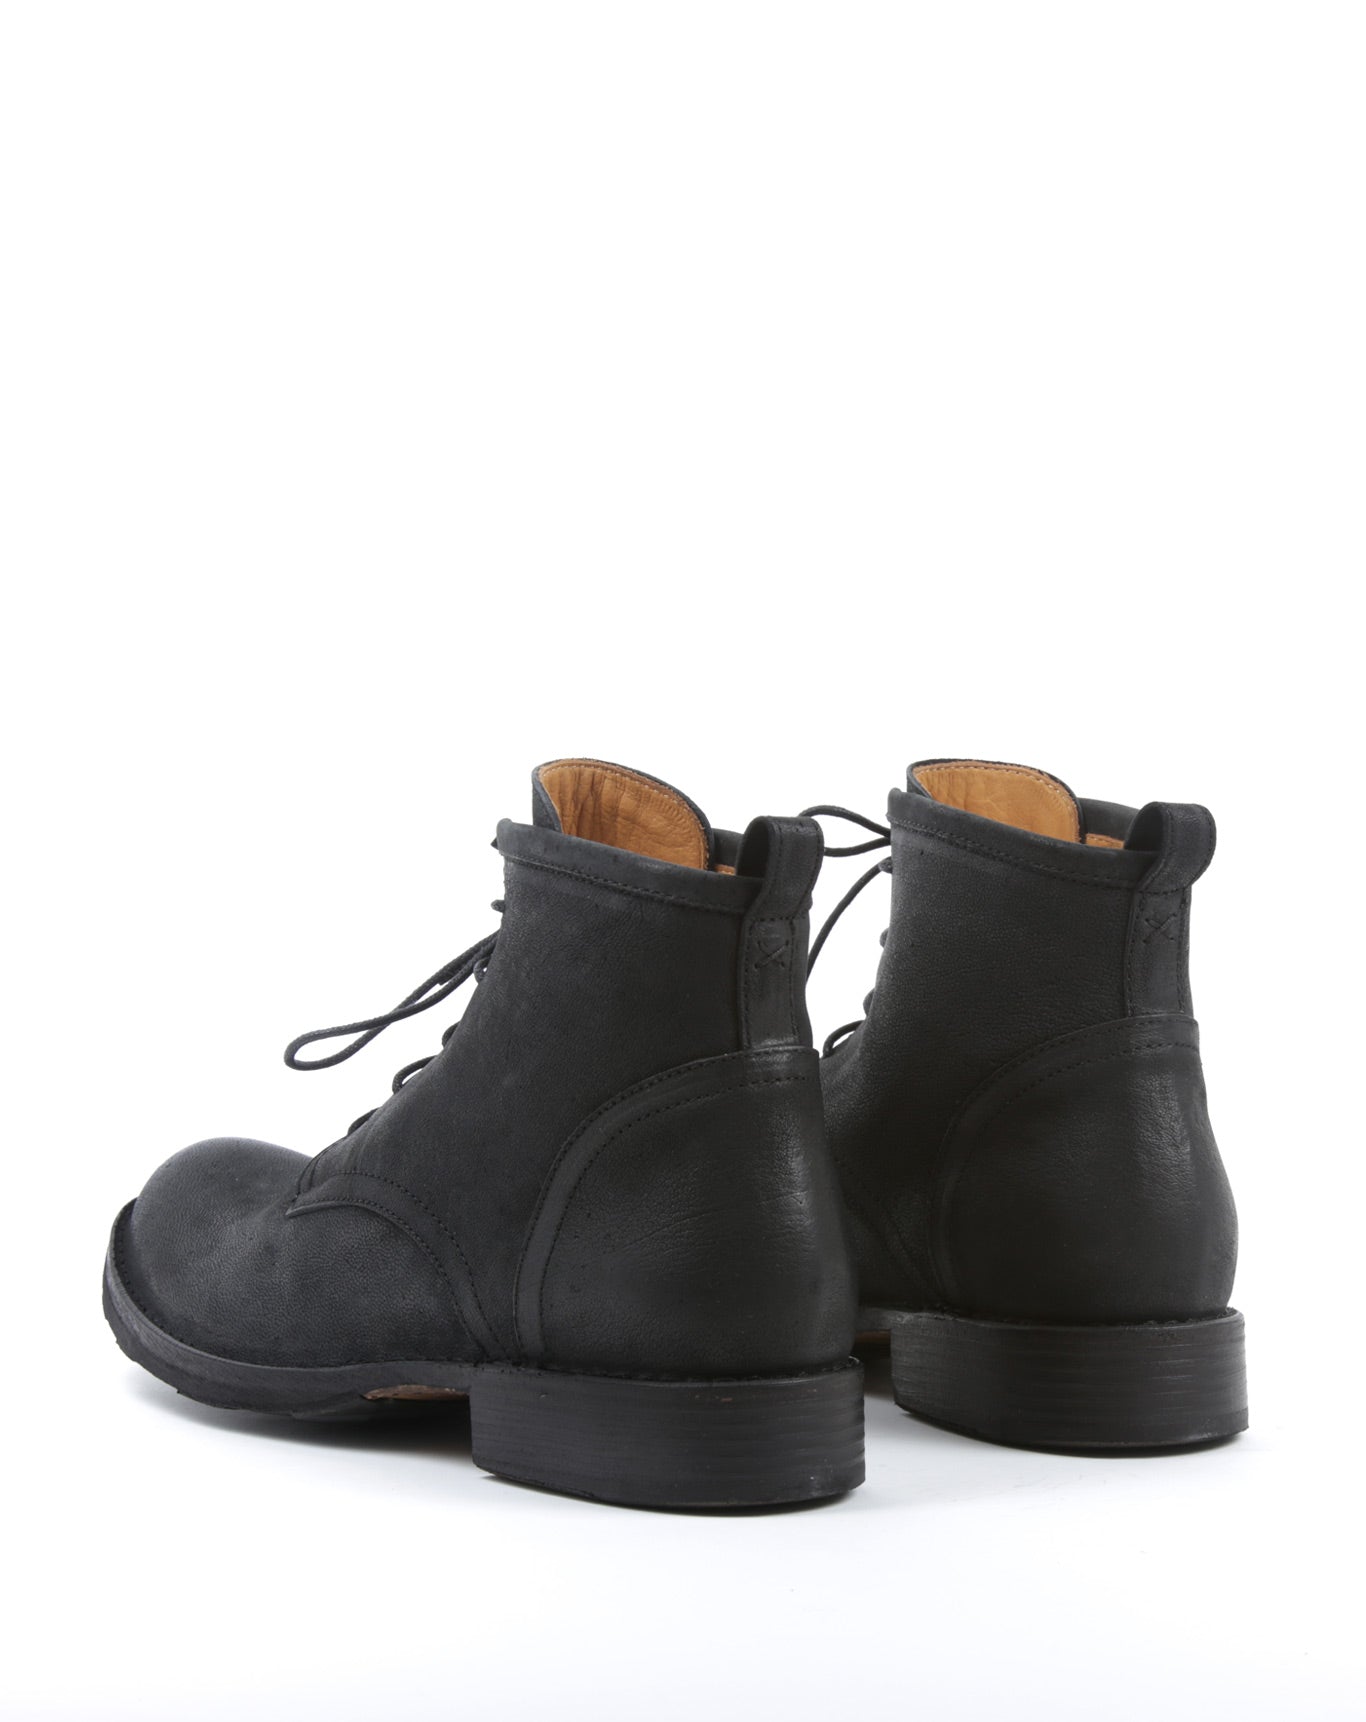 FIORENTINI + BAKER, ETERNITY EZRA, These unisex ankle boots are the perfect mix of British design and Italian craftsmanship. Handcrafted by skilled artisans. Made in Italy. Made to last.